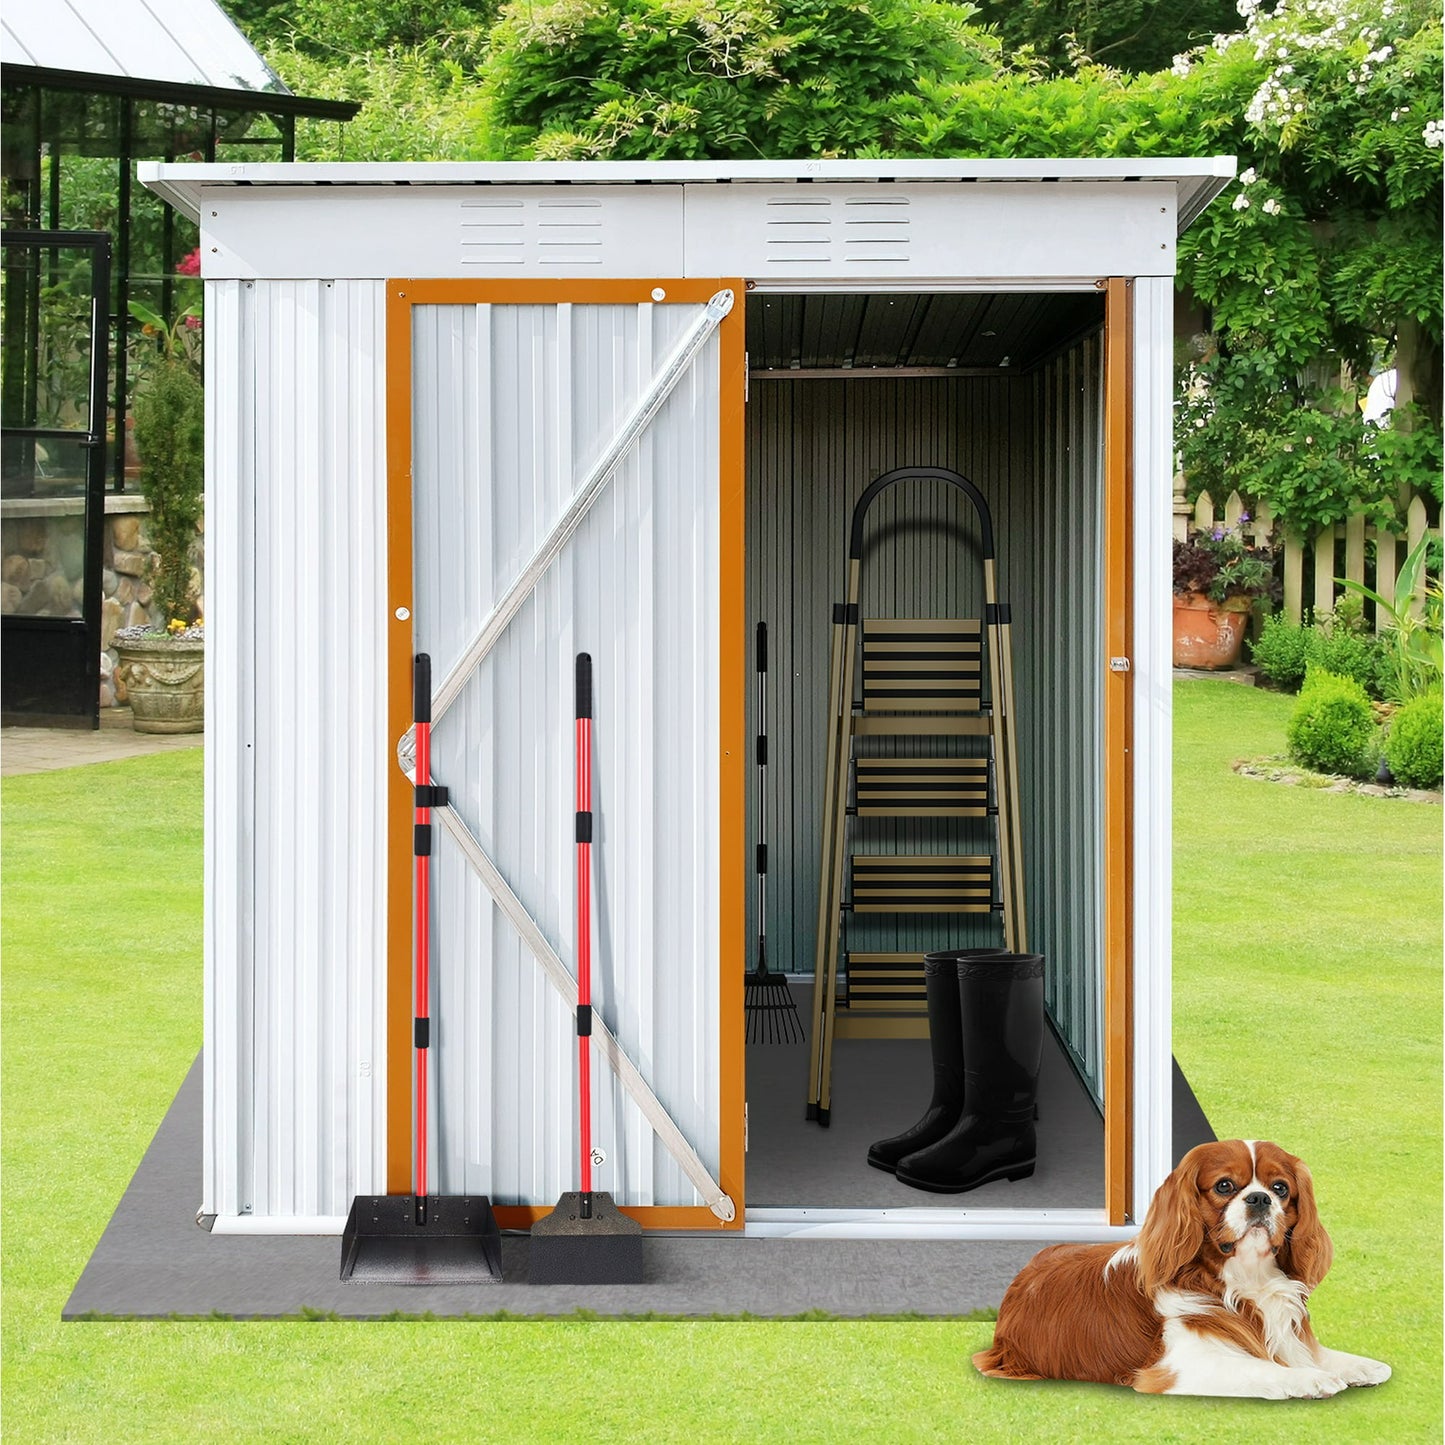 SYNGAR Outdoor Shed 5 x 3 ft, Patio Tool Storage Shed Galvanized Metal Storage Shed with Lockable Door Sloped Roof Lawn Backyard Garden, Waterproof & UV-proof, White